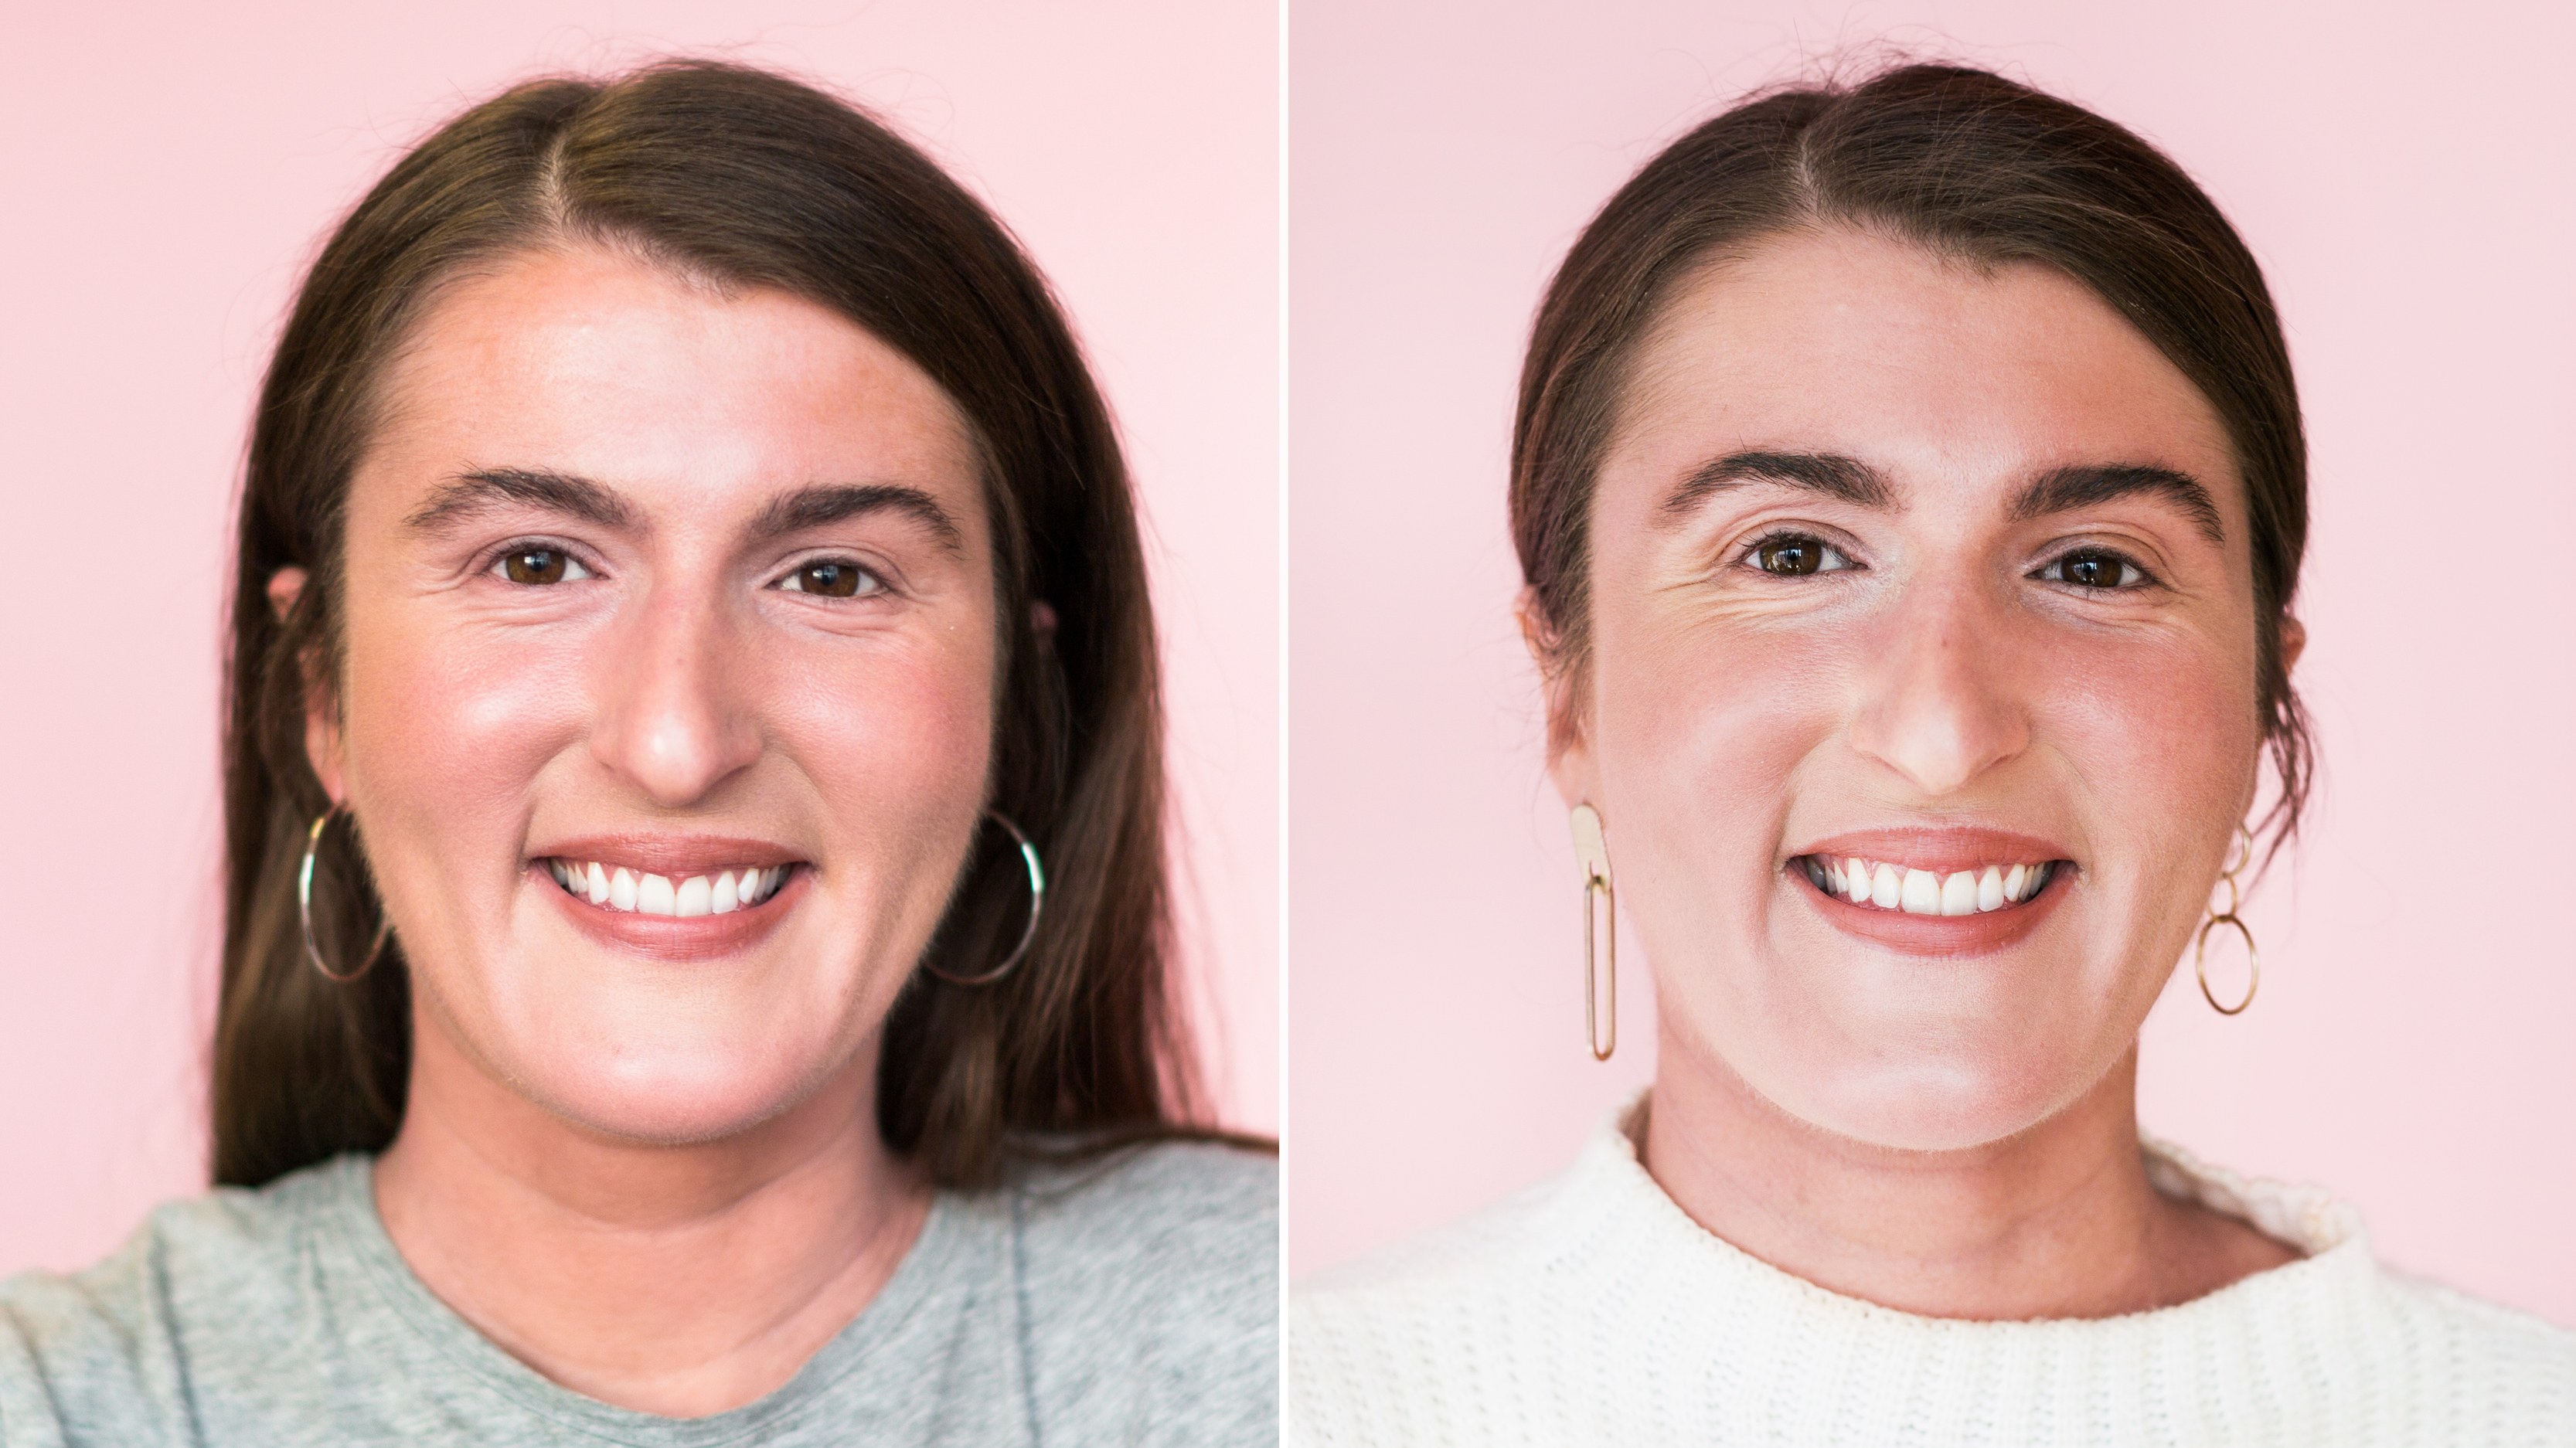 I Got Eyebrow Shaping and Tinting: Before and After Photos | Allure